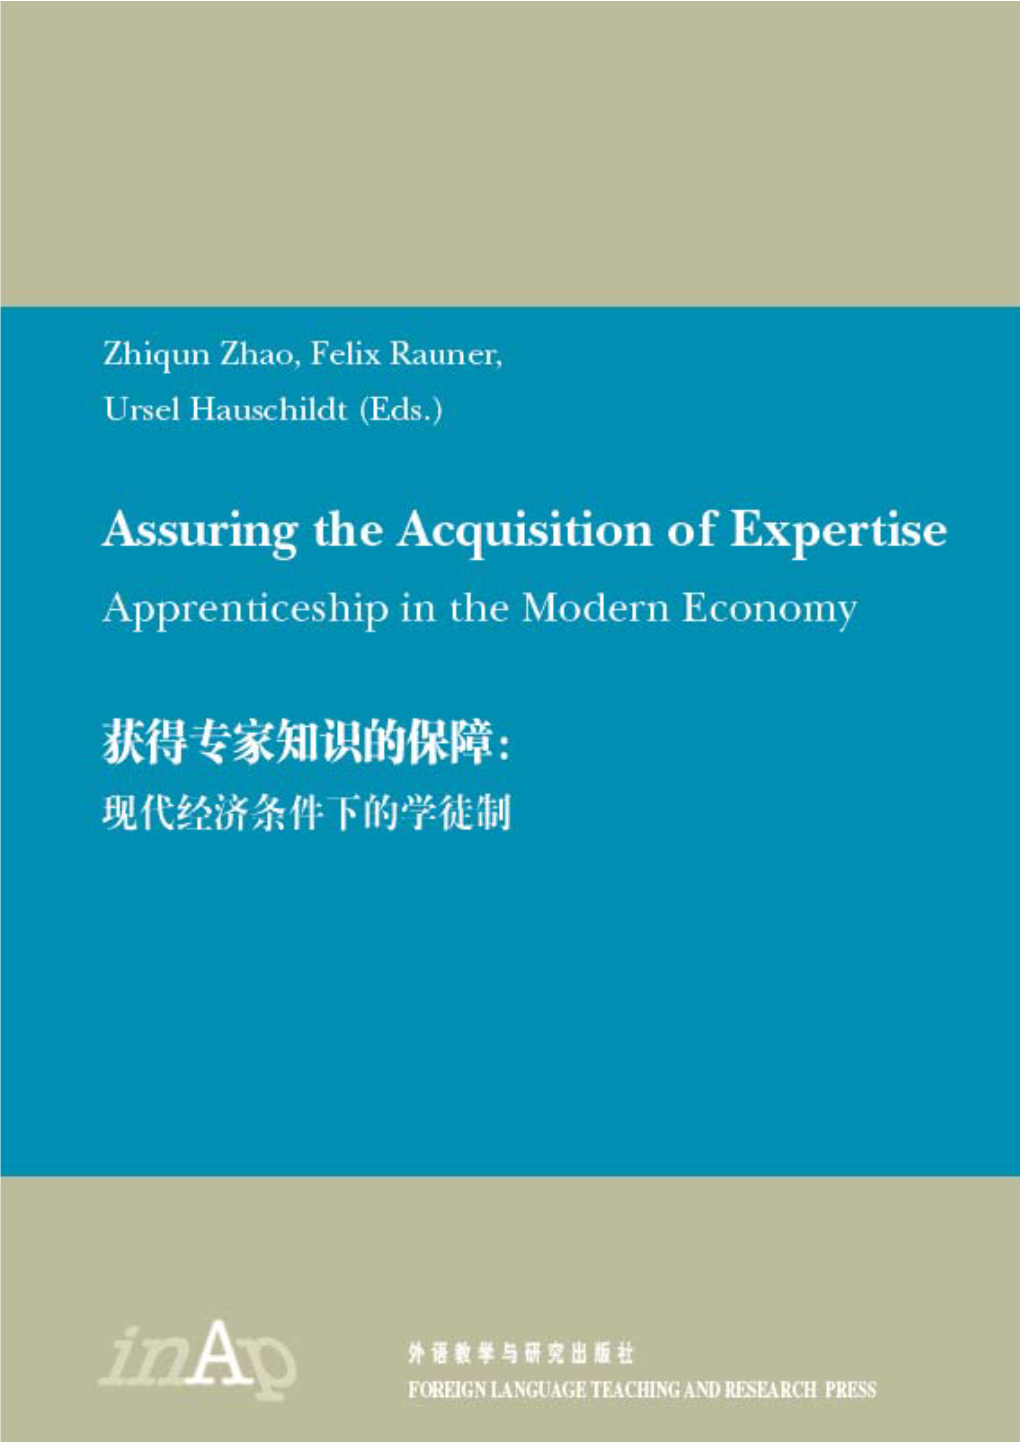 Proceedings, Academy of Human Resource Development Conference, Volume I (Pp